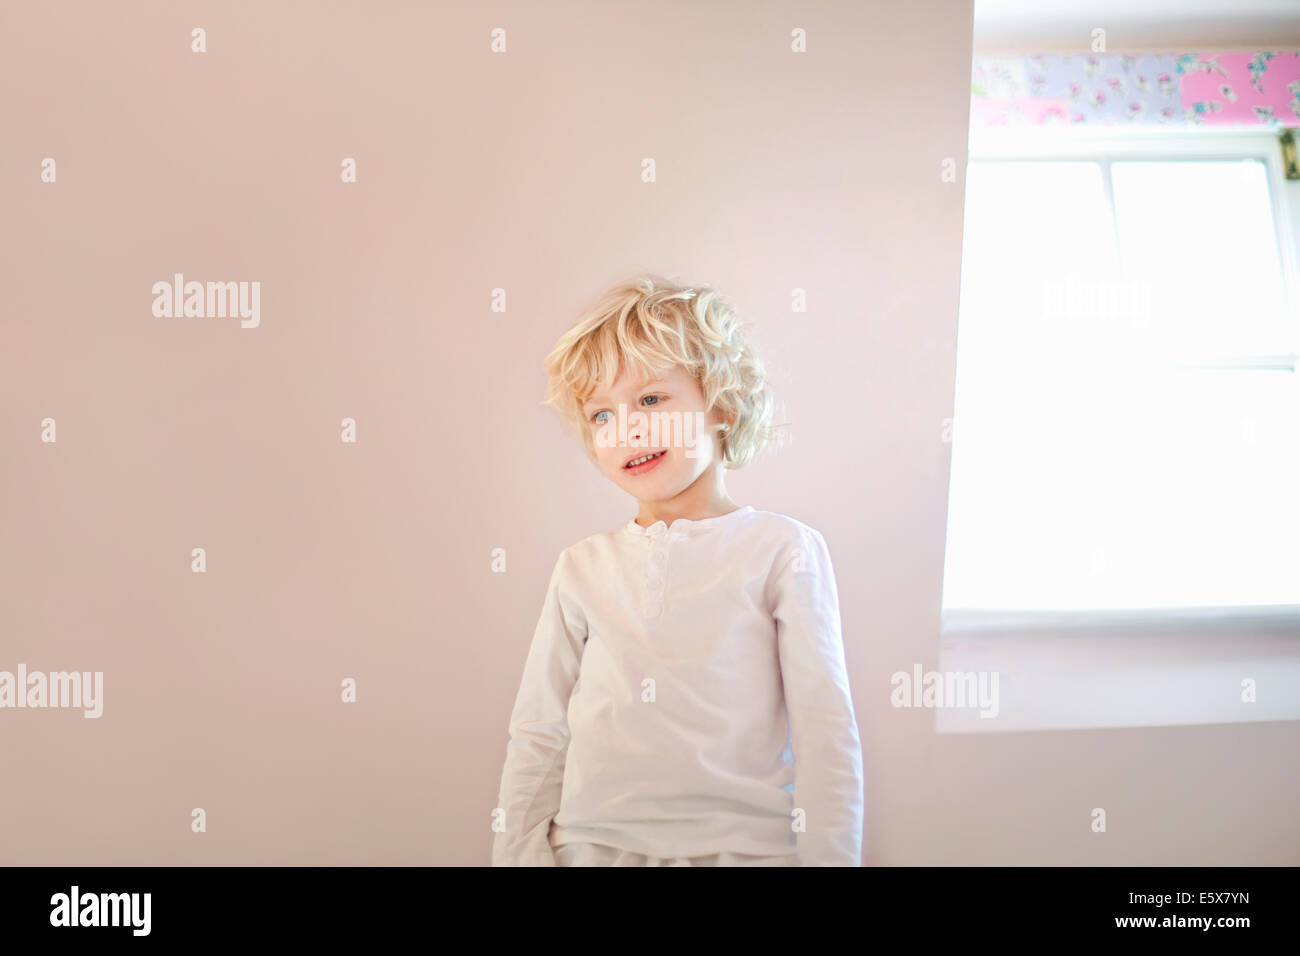 Portrait of four year old boy in bedroom Stock Photo